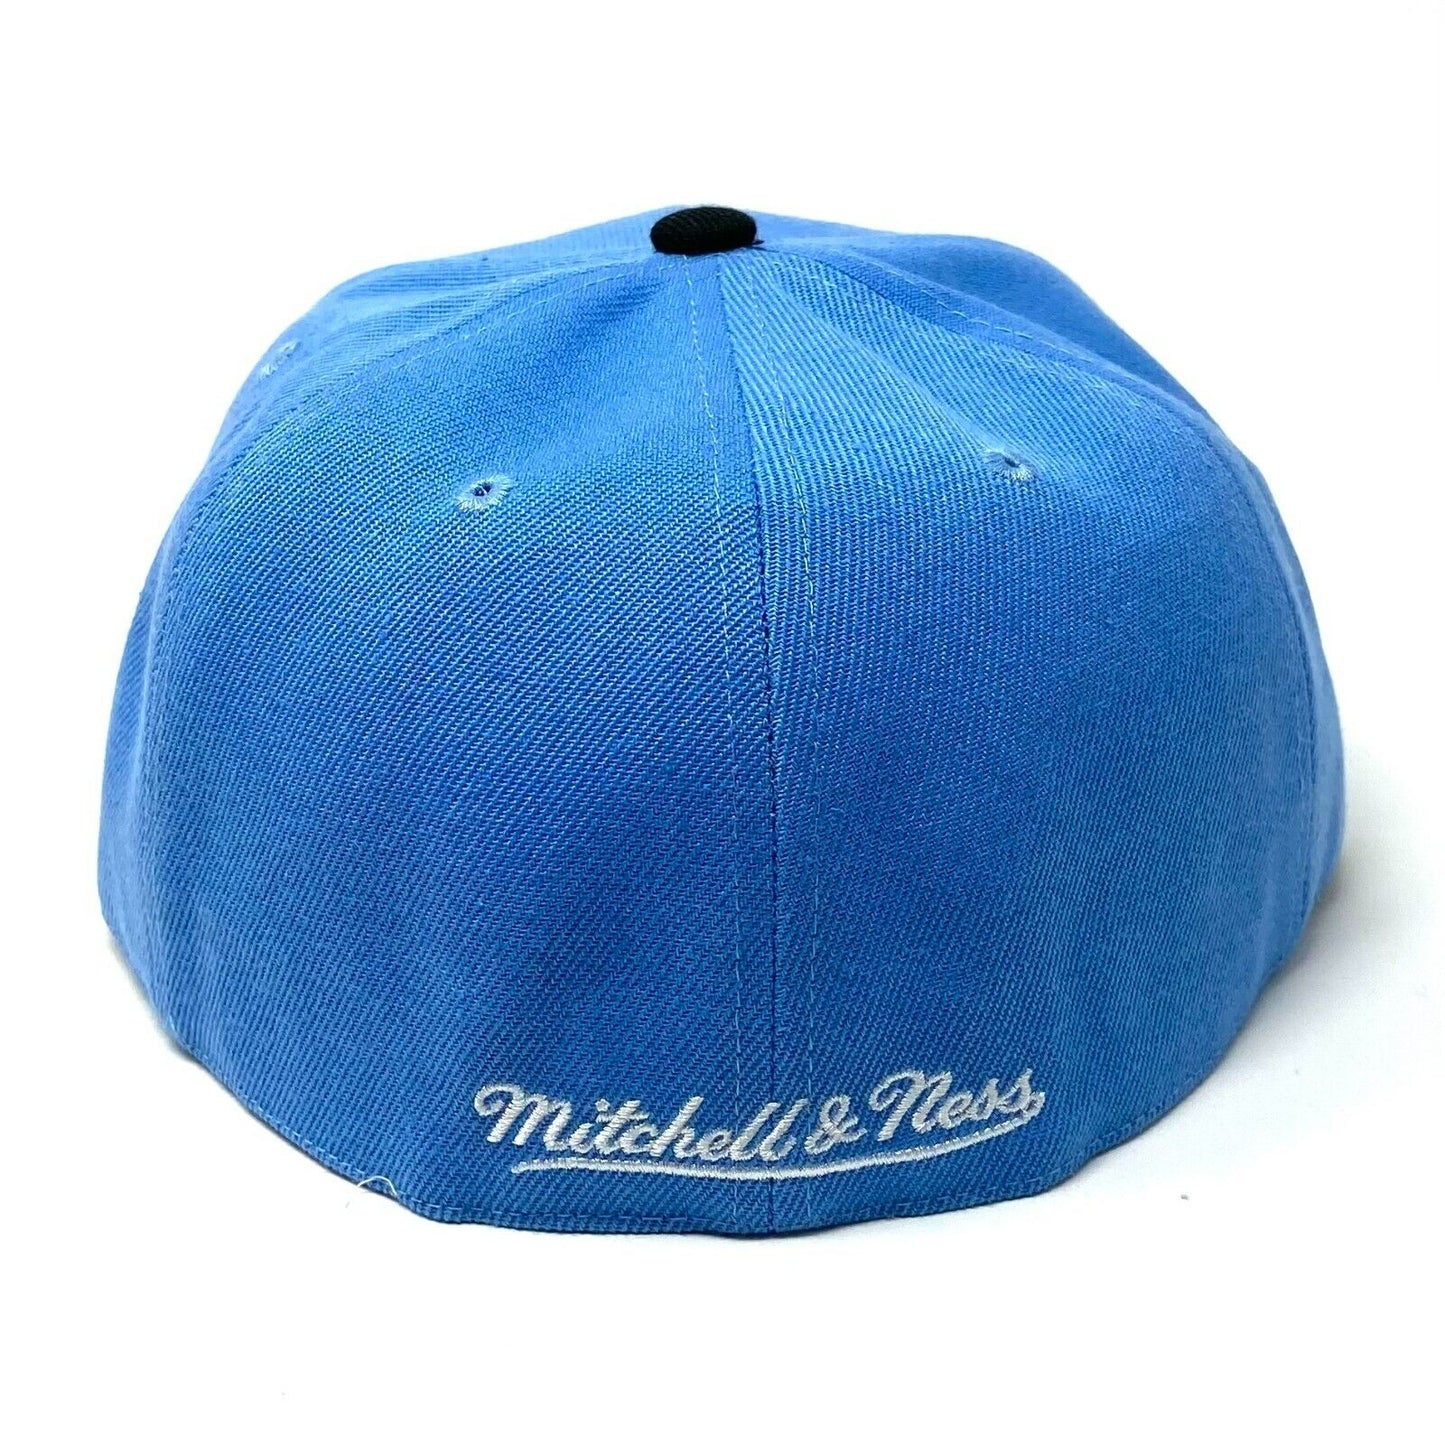 Men's Mitchell & Ness Los Angeles Lakers Hardwood Classics Reload 2.0 Blue/Black Dynasty Fitted Hat